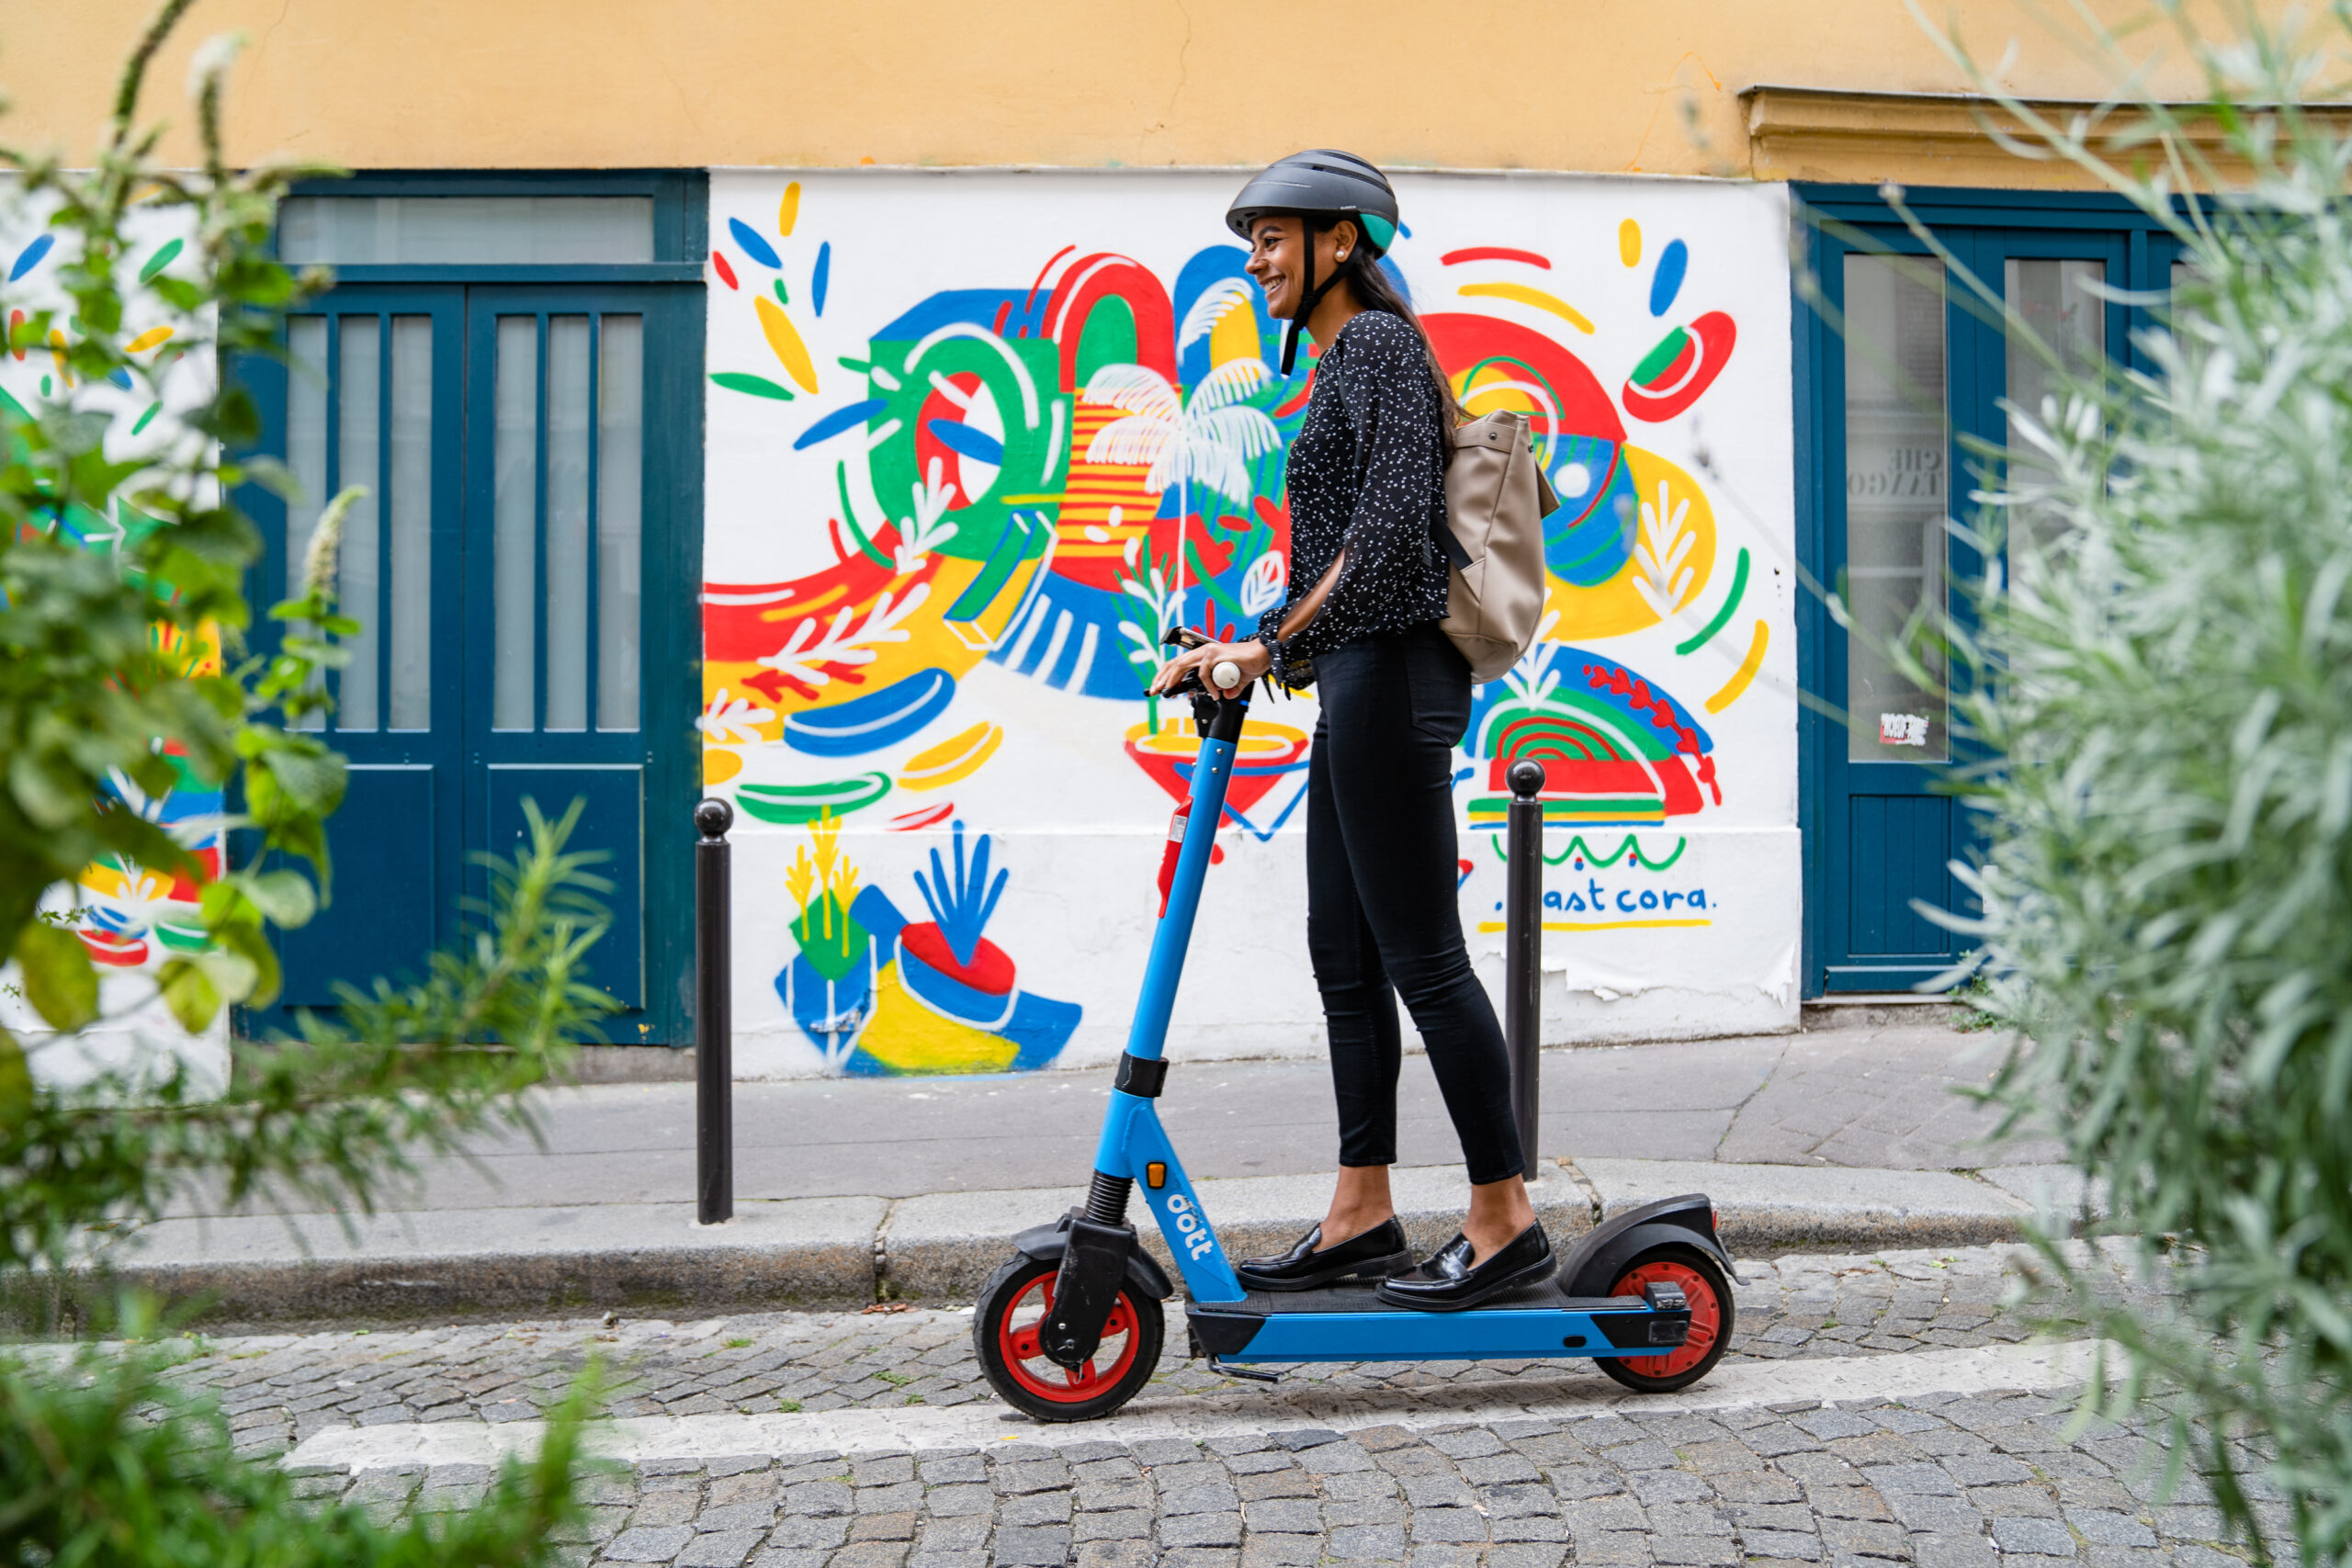 Pavement riding occurred on a very small minority of overall e-scooter use